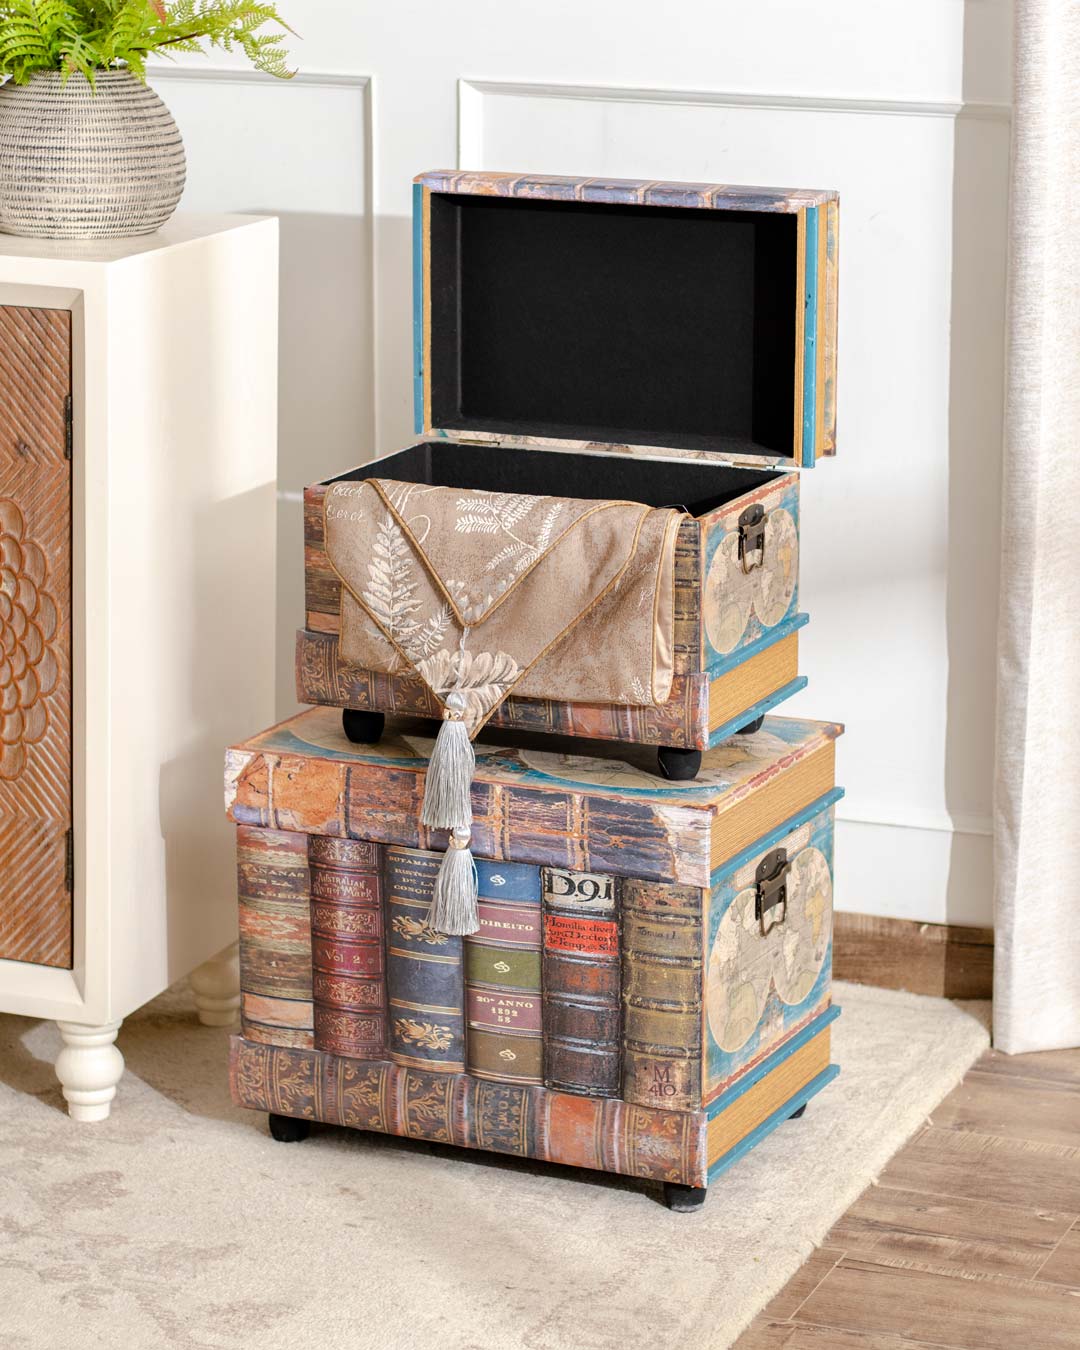 The Repository Storage Trunks - Set of 2